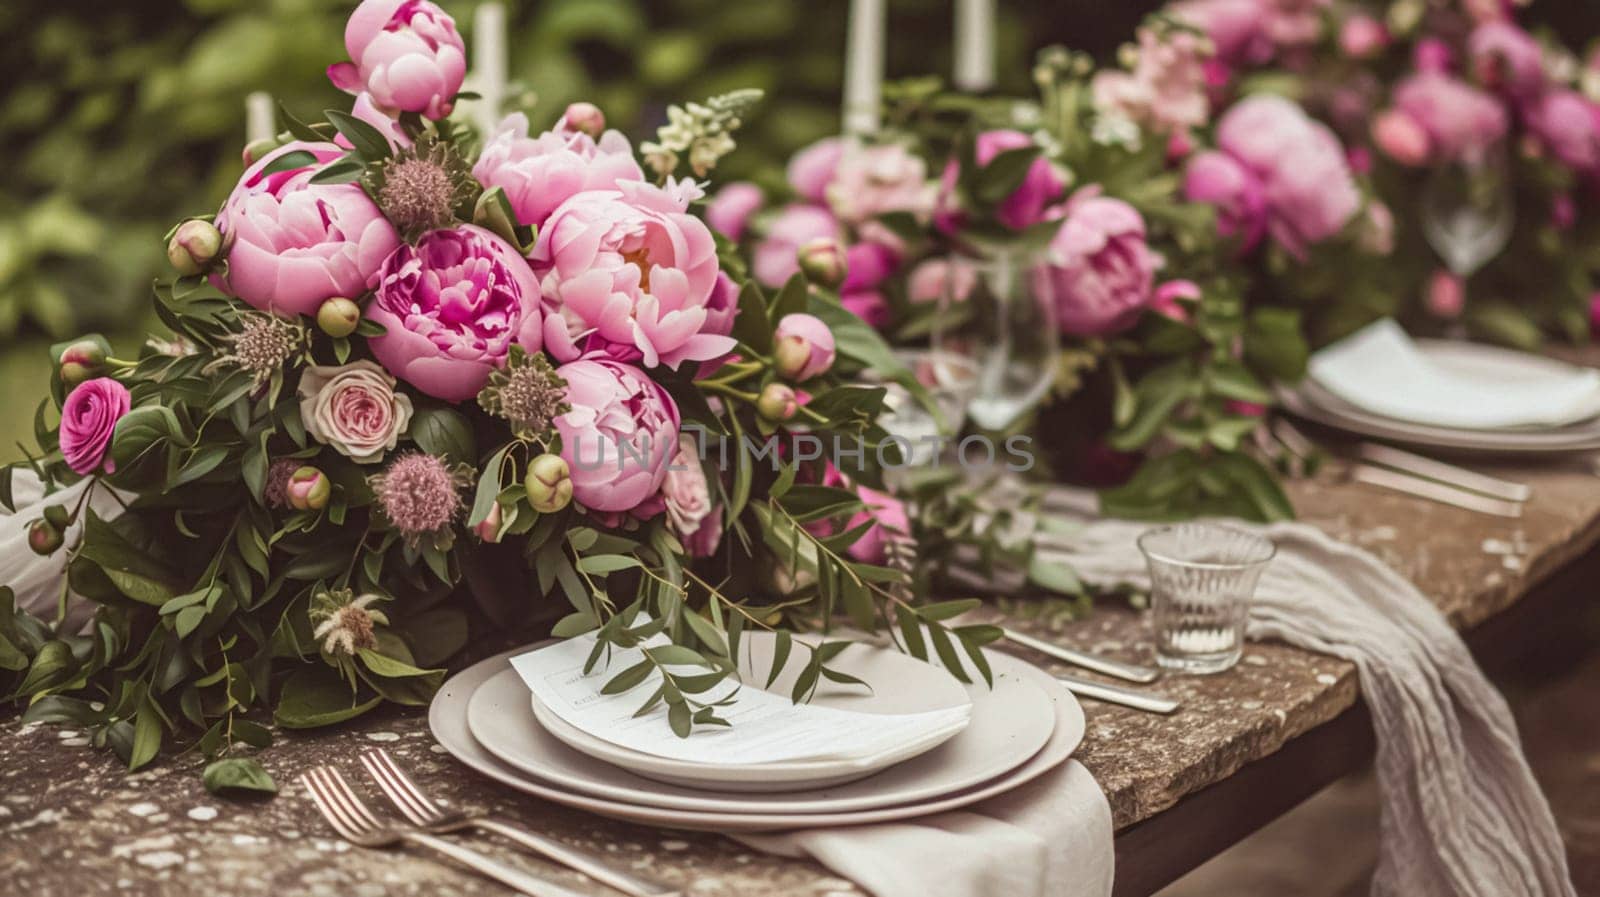 Wedding decoration with peonies, floral decor and event celebration, peony flowers and wedding ceremony in the garden, English country style by Anneleven